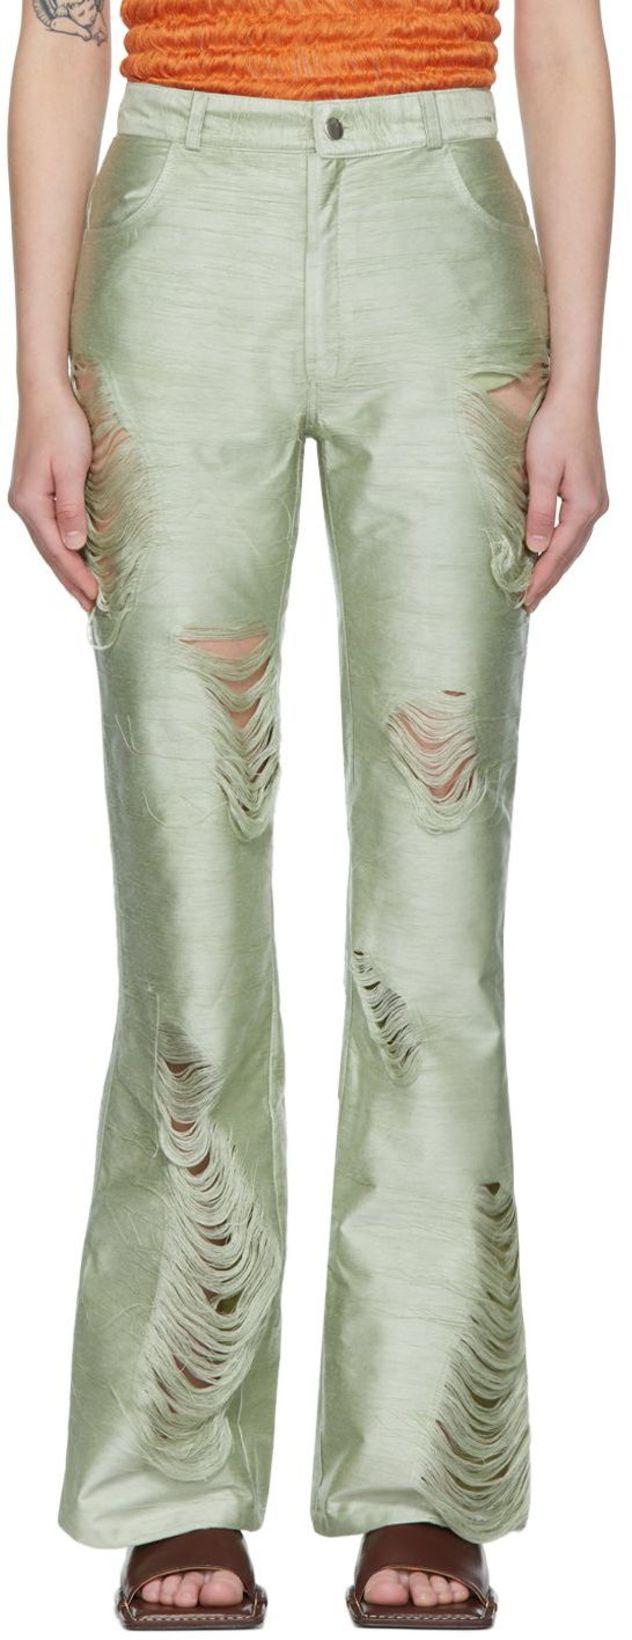 Green Polyester Trousers by CONSTANCA ENTRUDO